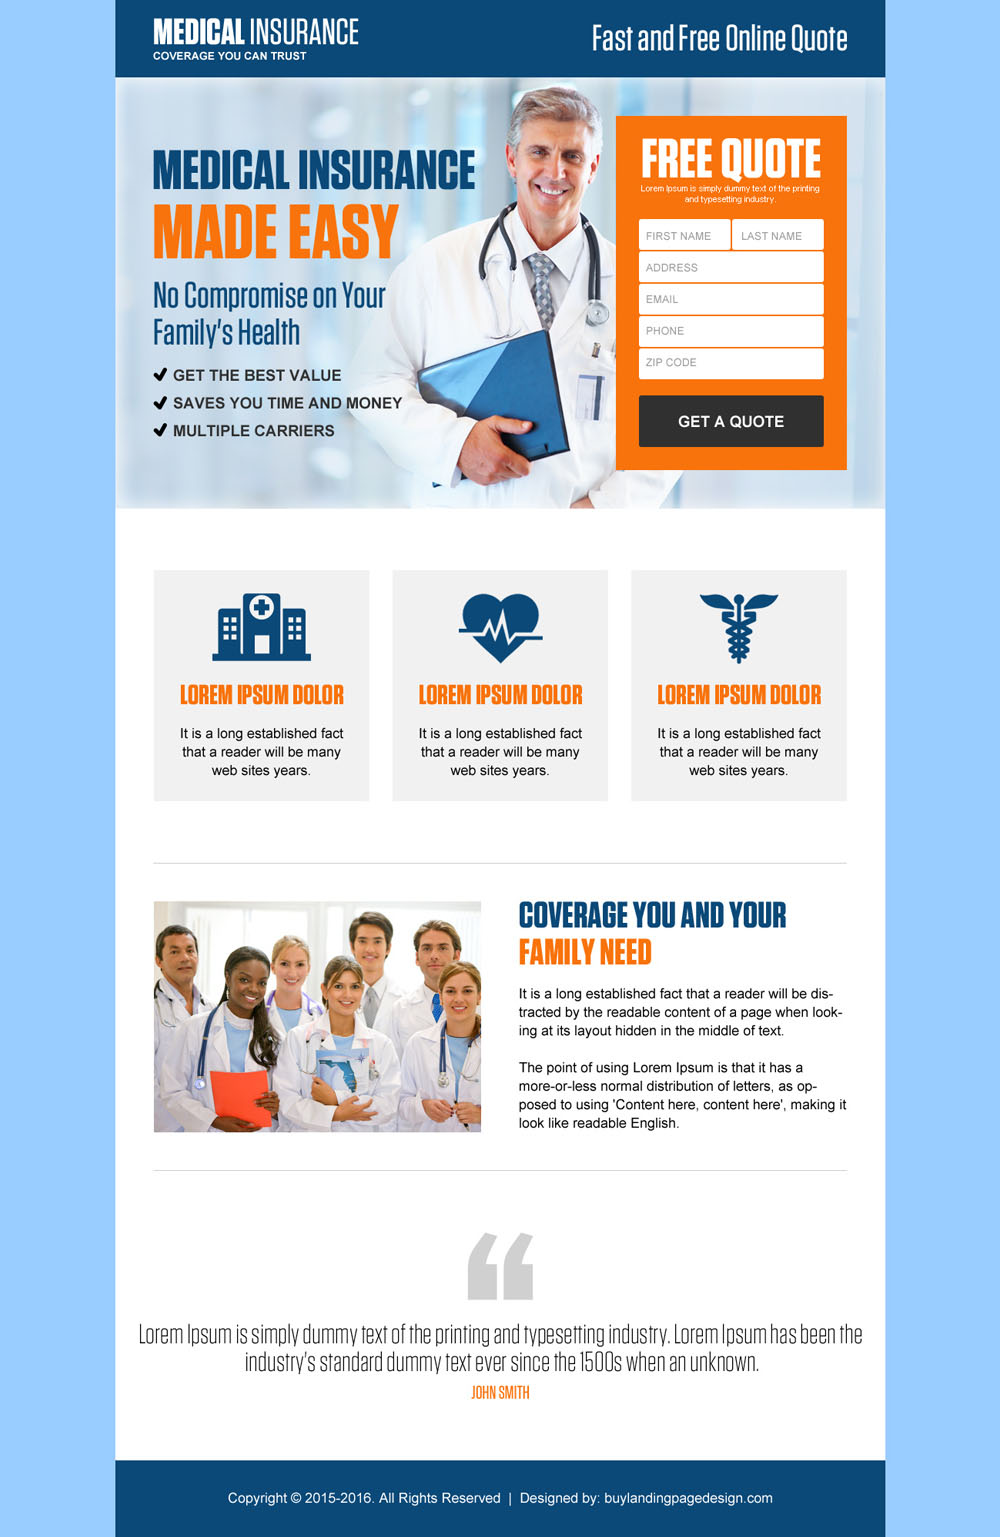 minimal-landing-page-design-for-health-insurance-free-quote-service-005